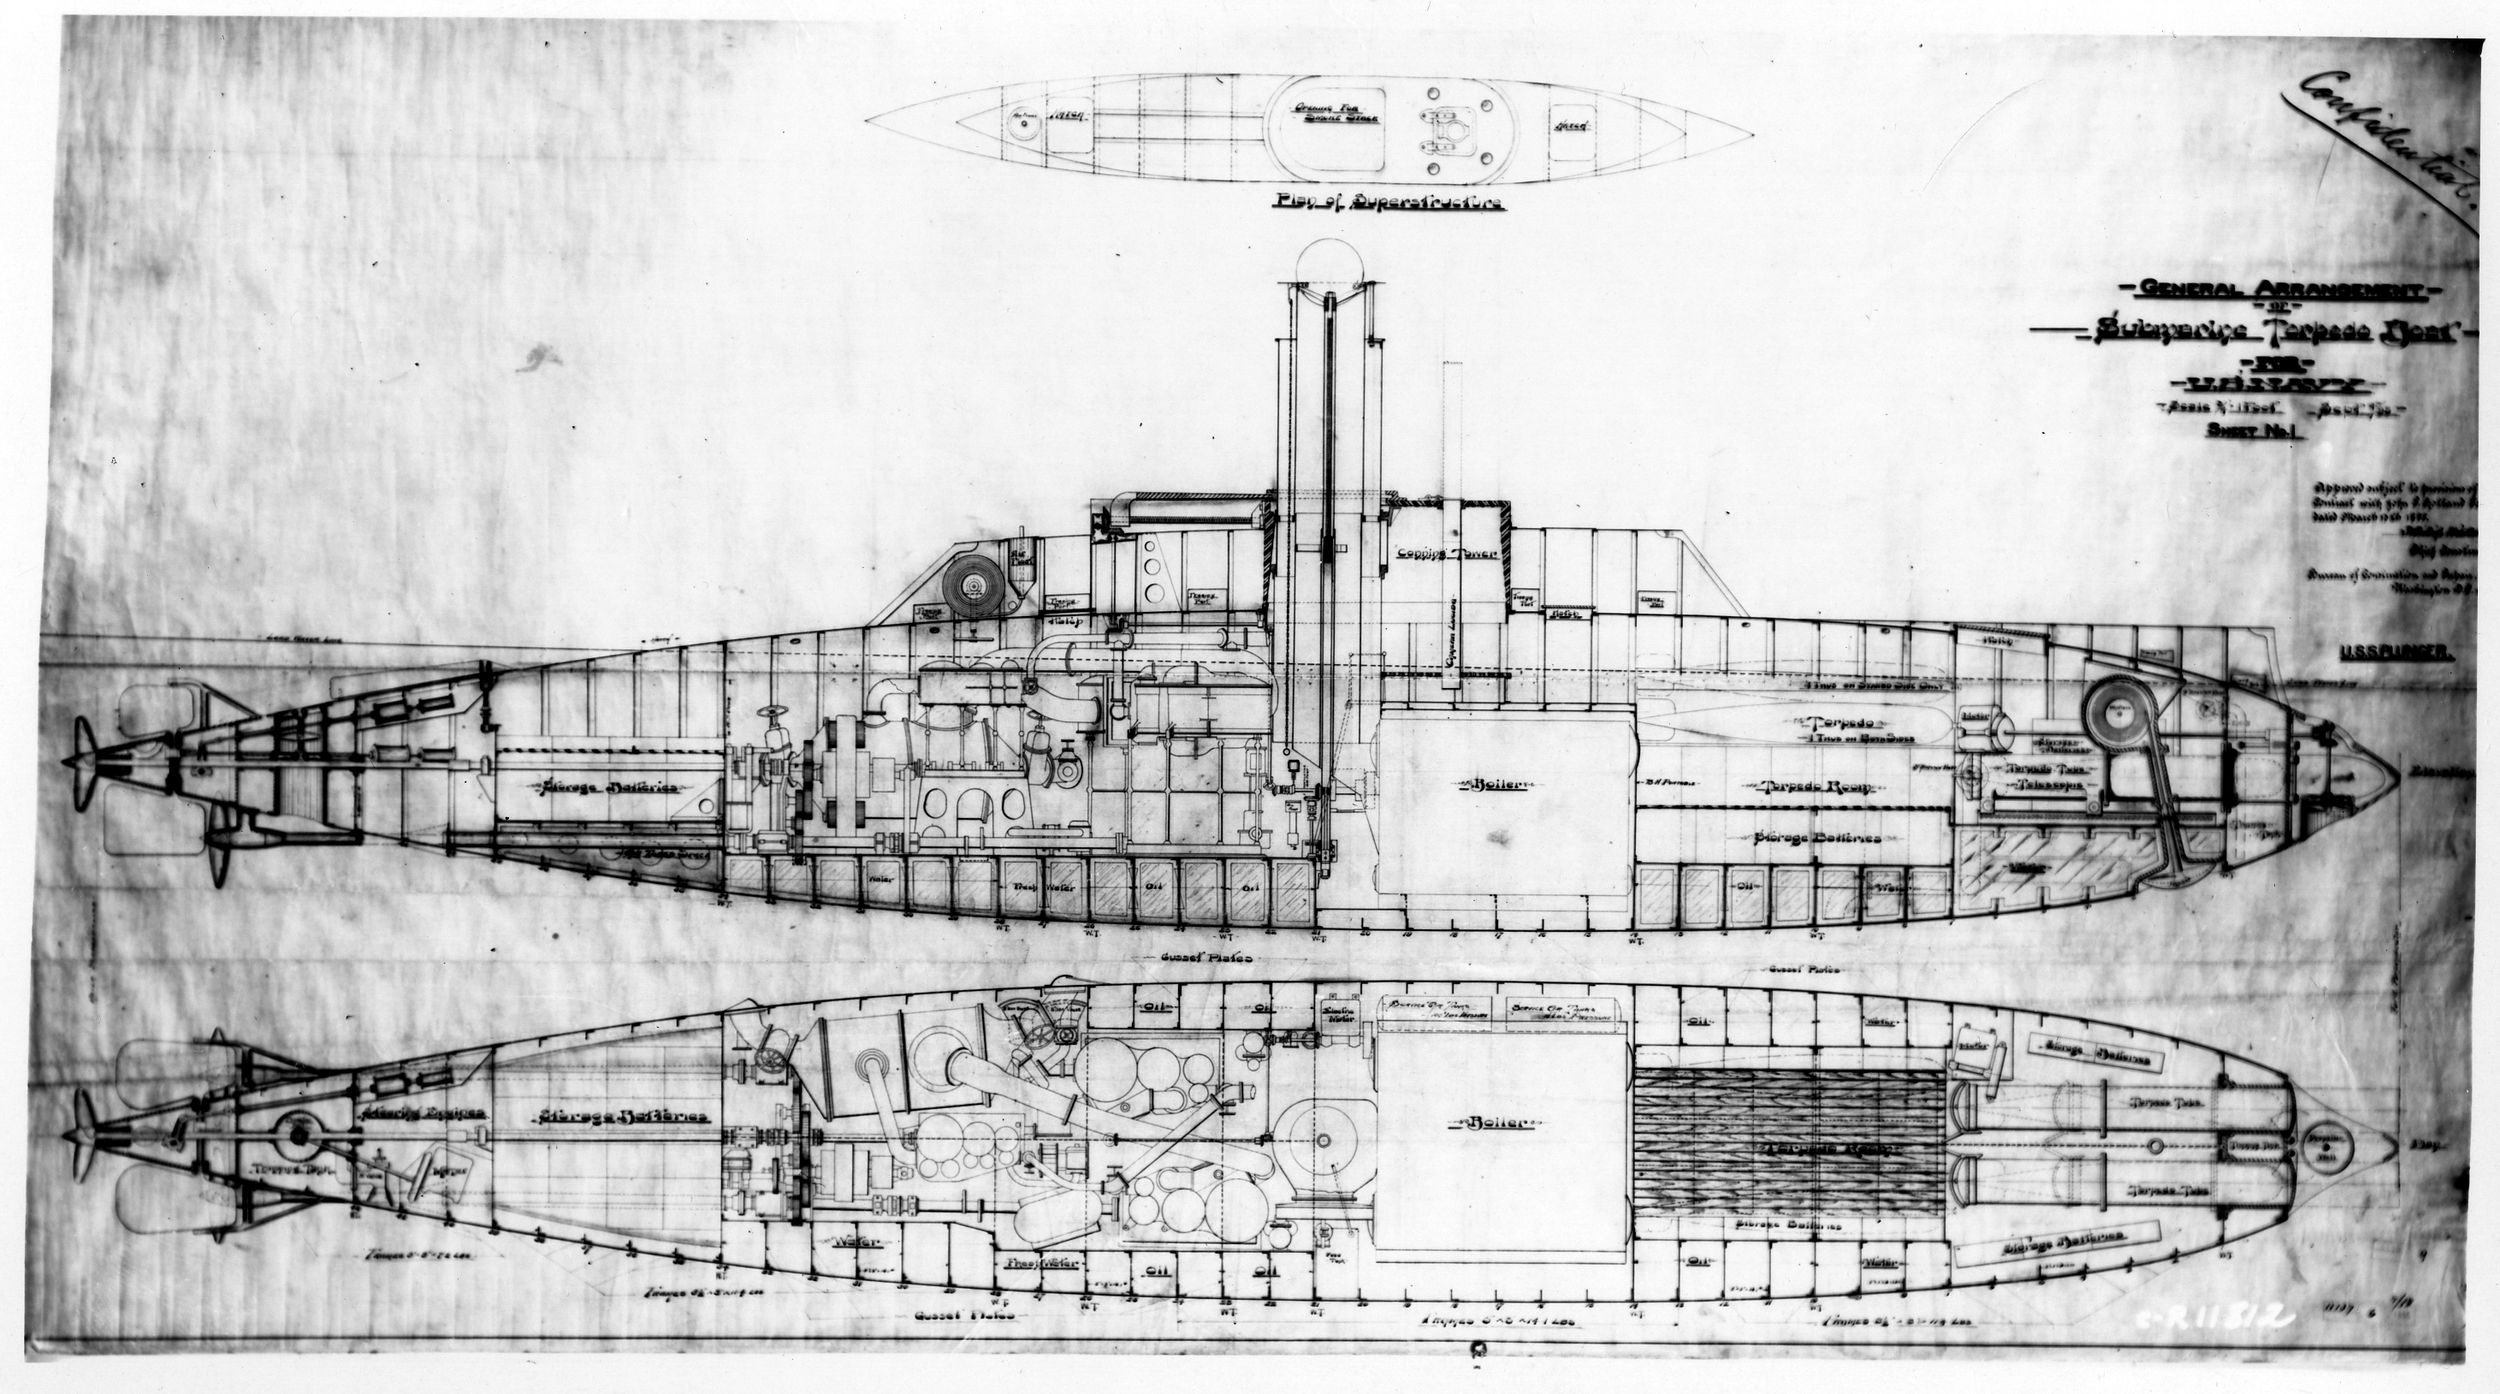 General plans for USS Plunger, dated March 1895.